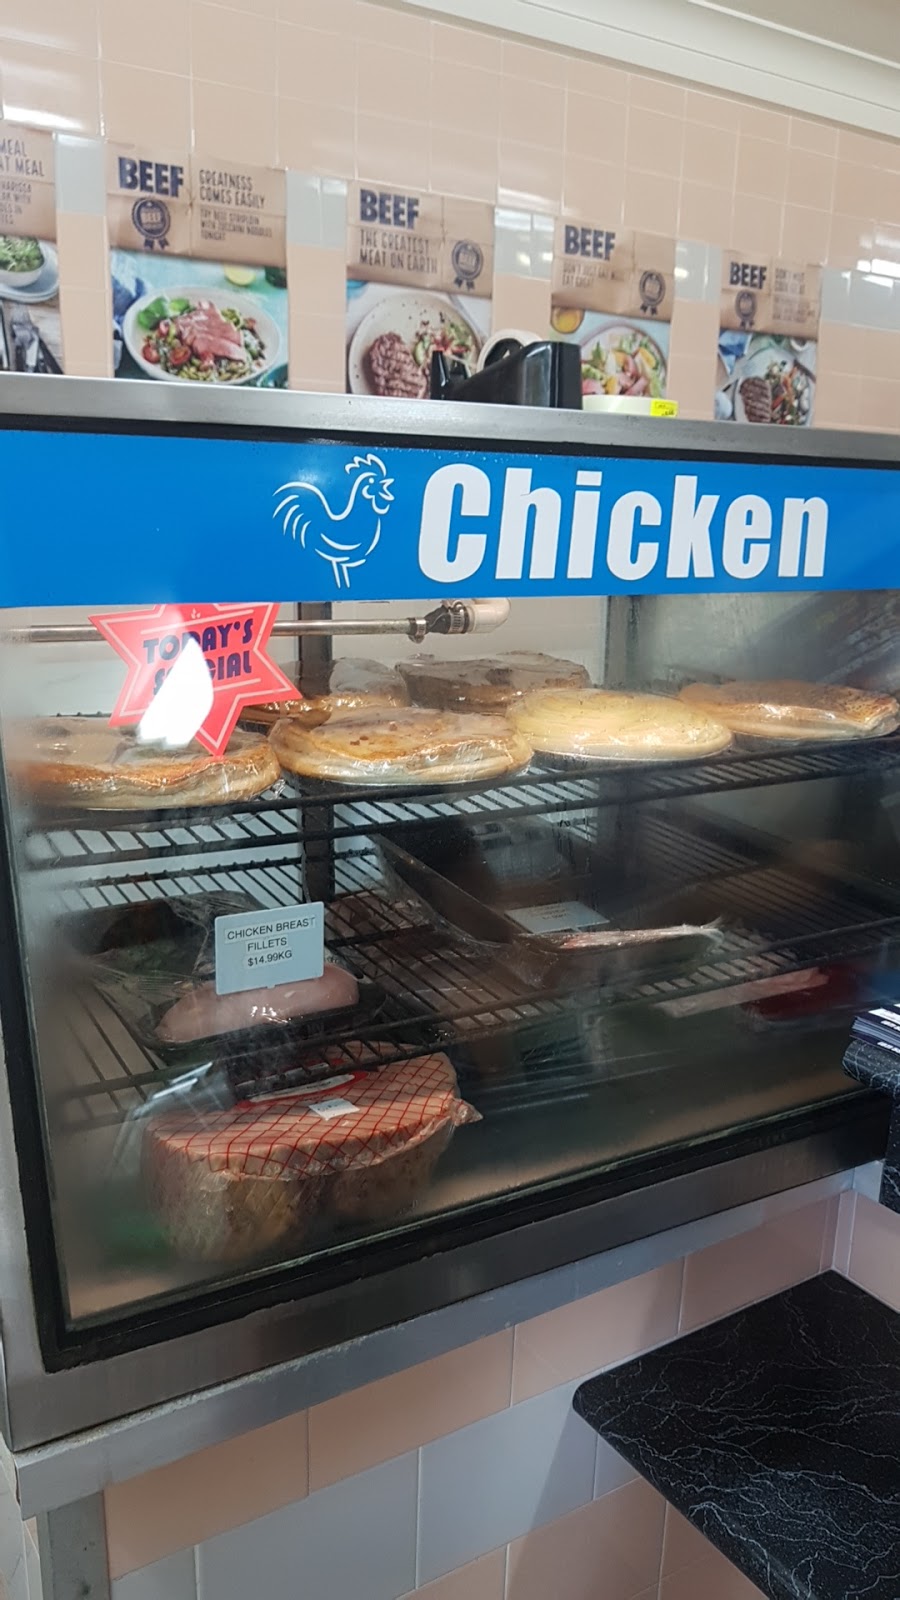 Panorama Meats | food | Panorama Drive, shop 11/24 Scenic Dr, Tweed Heads West NSW 2486, Australia | 0755999392 OR +61 7 5599 9392